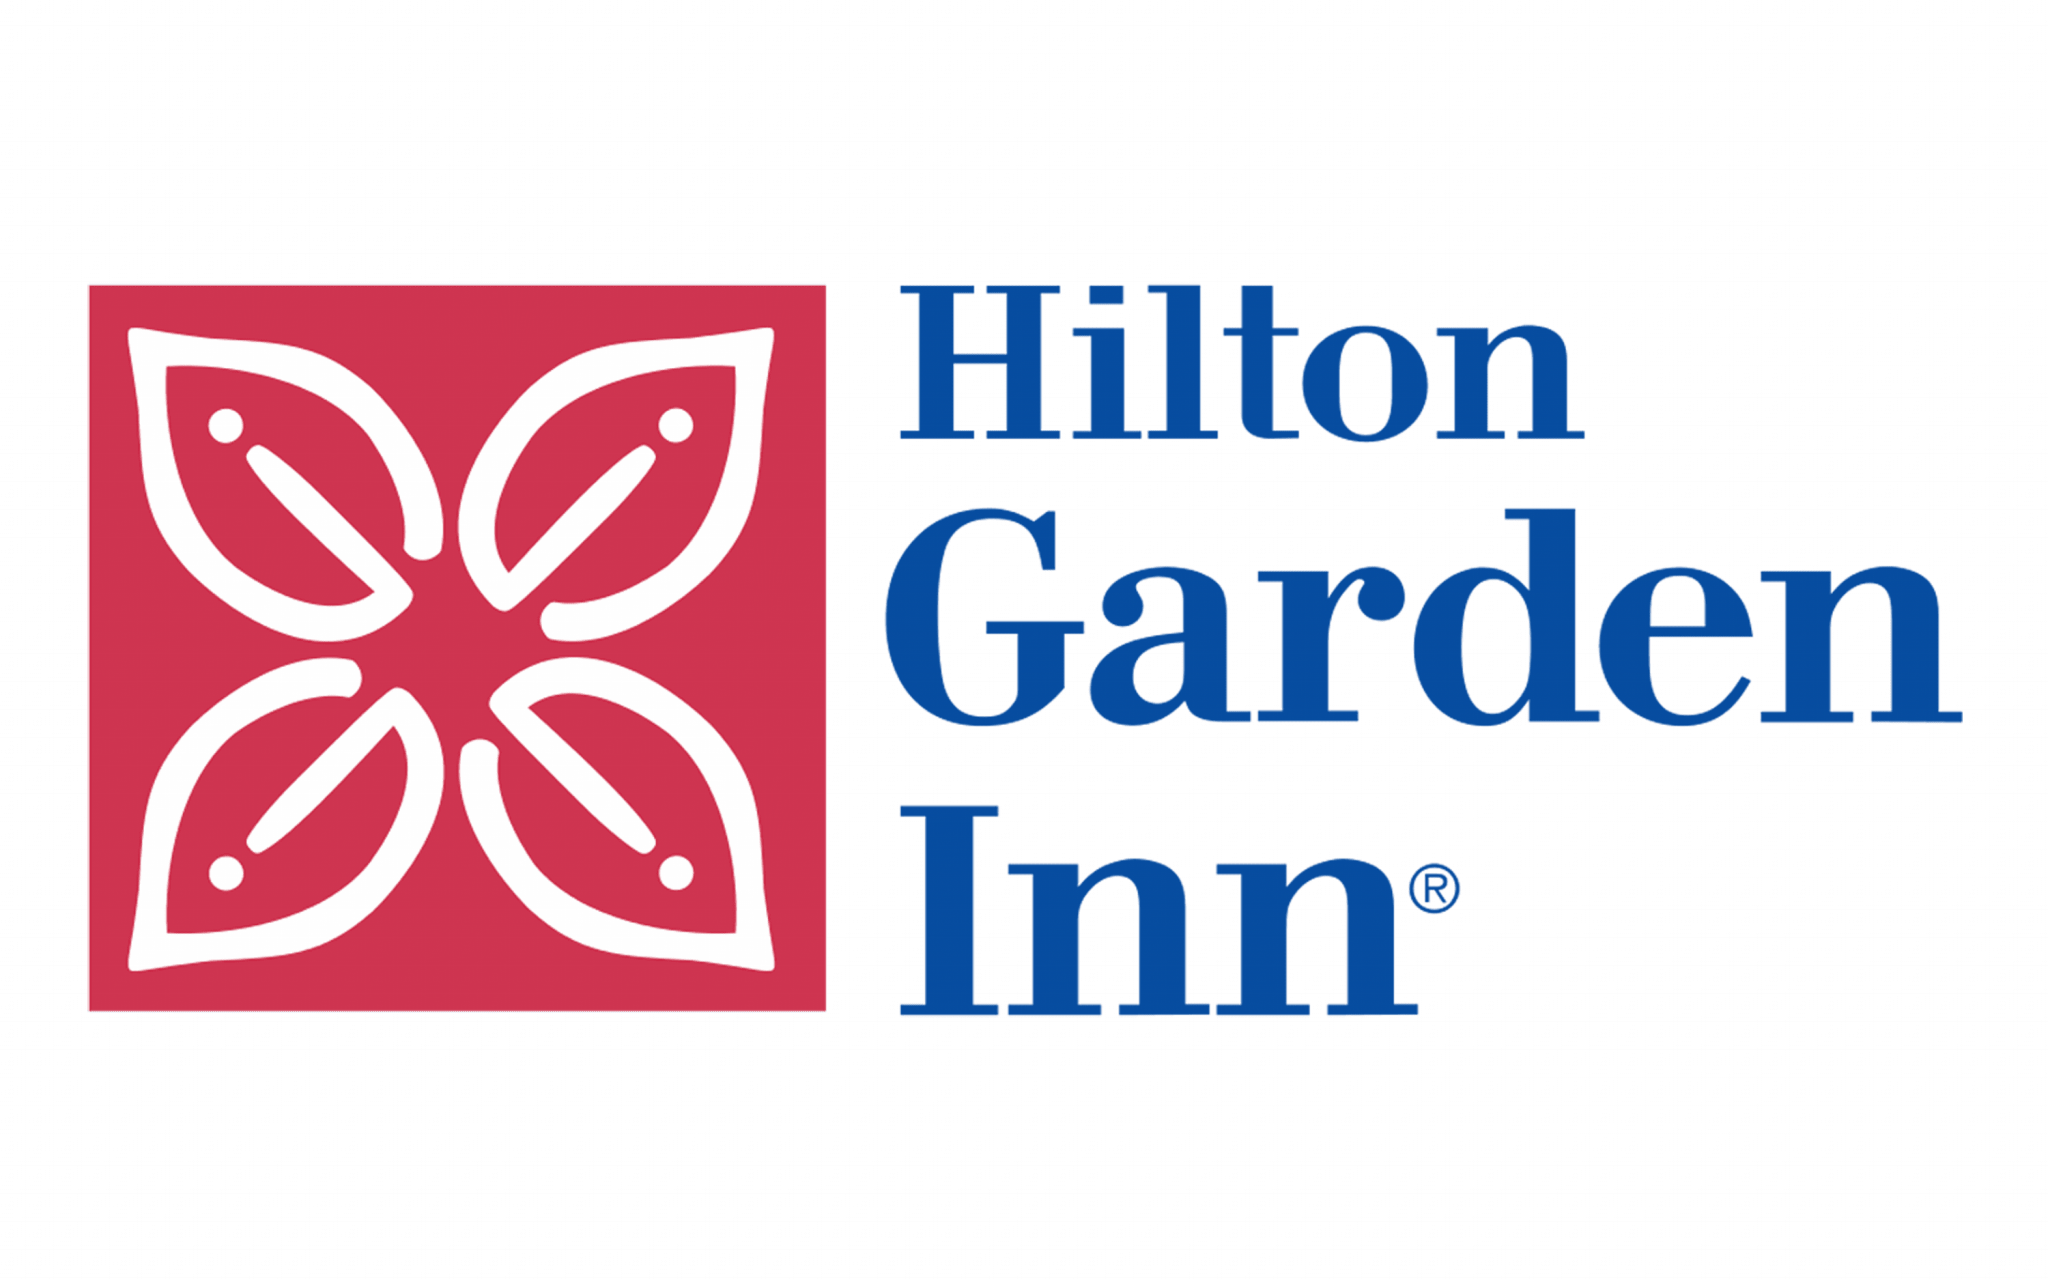 Hilton Garden Inn logo and symbol, meaning, history, PNG